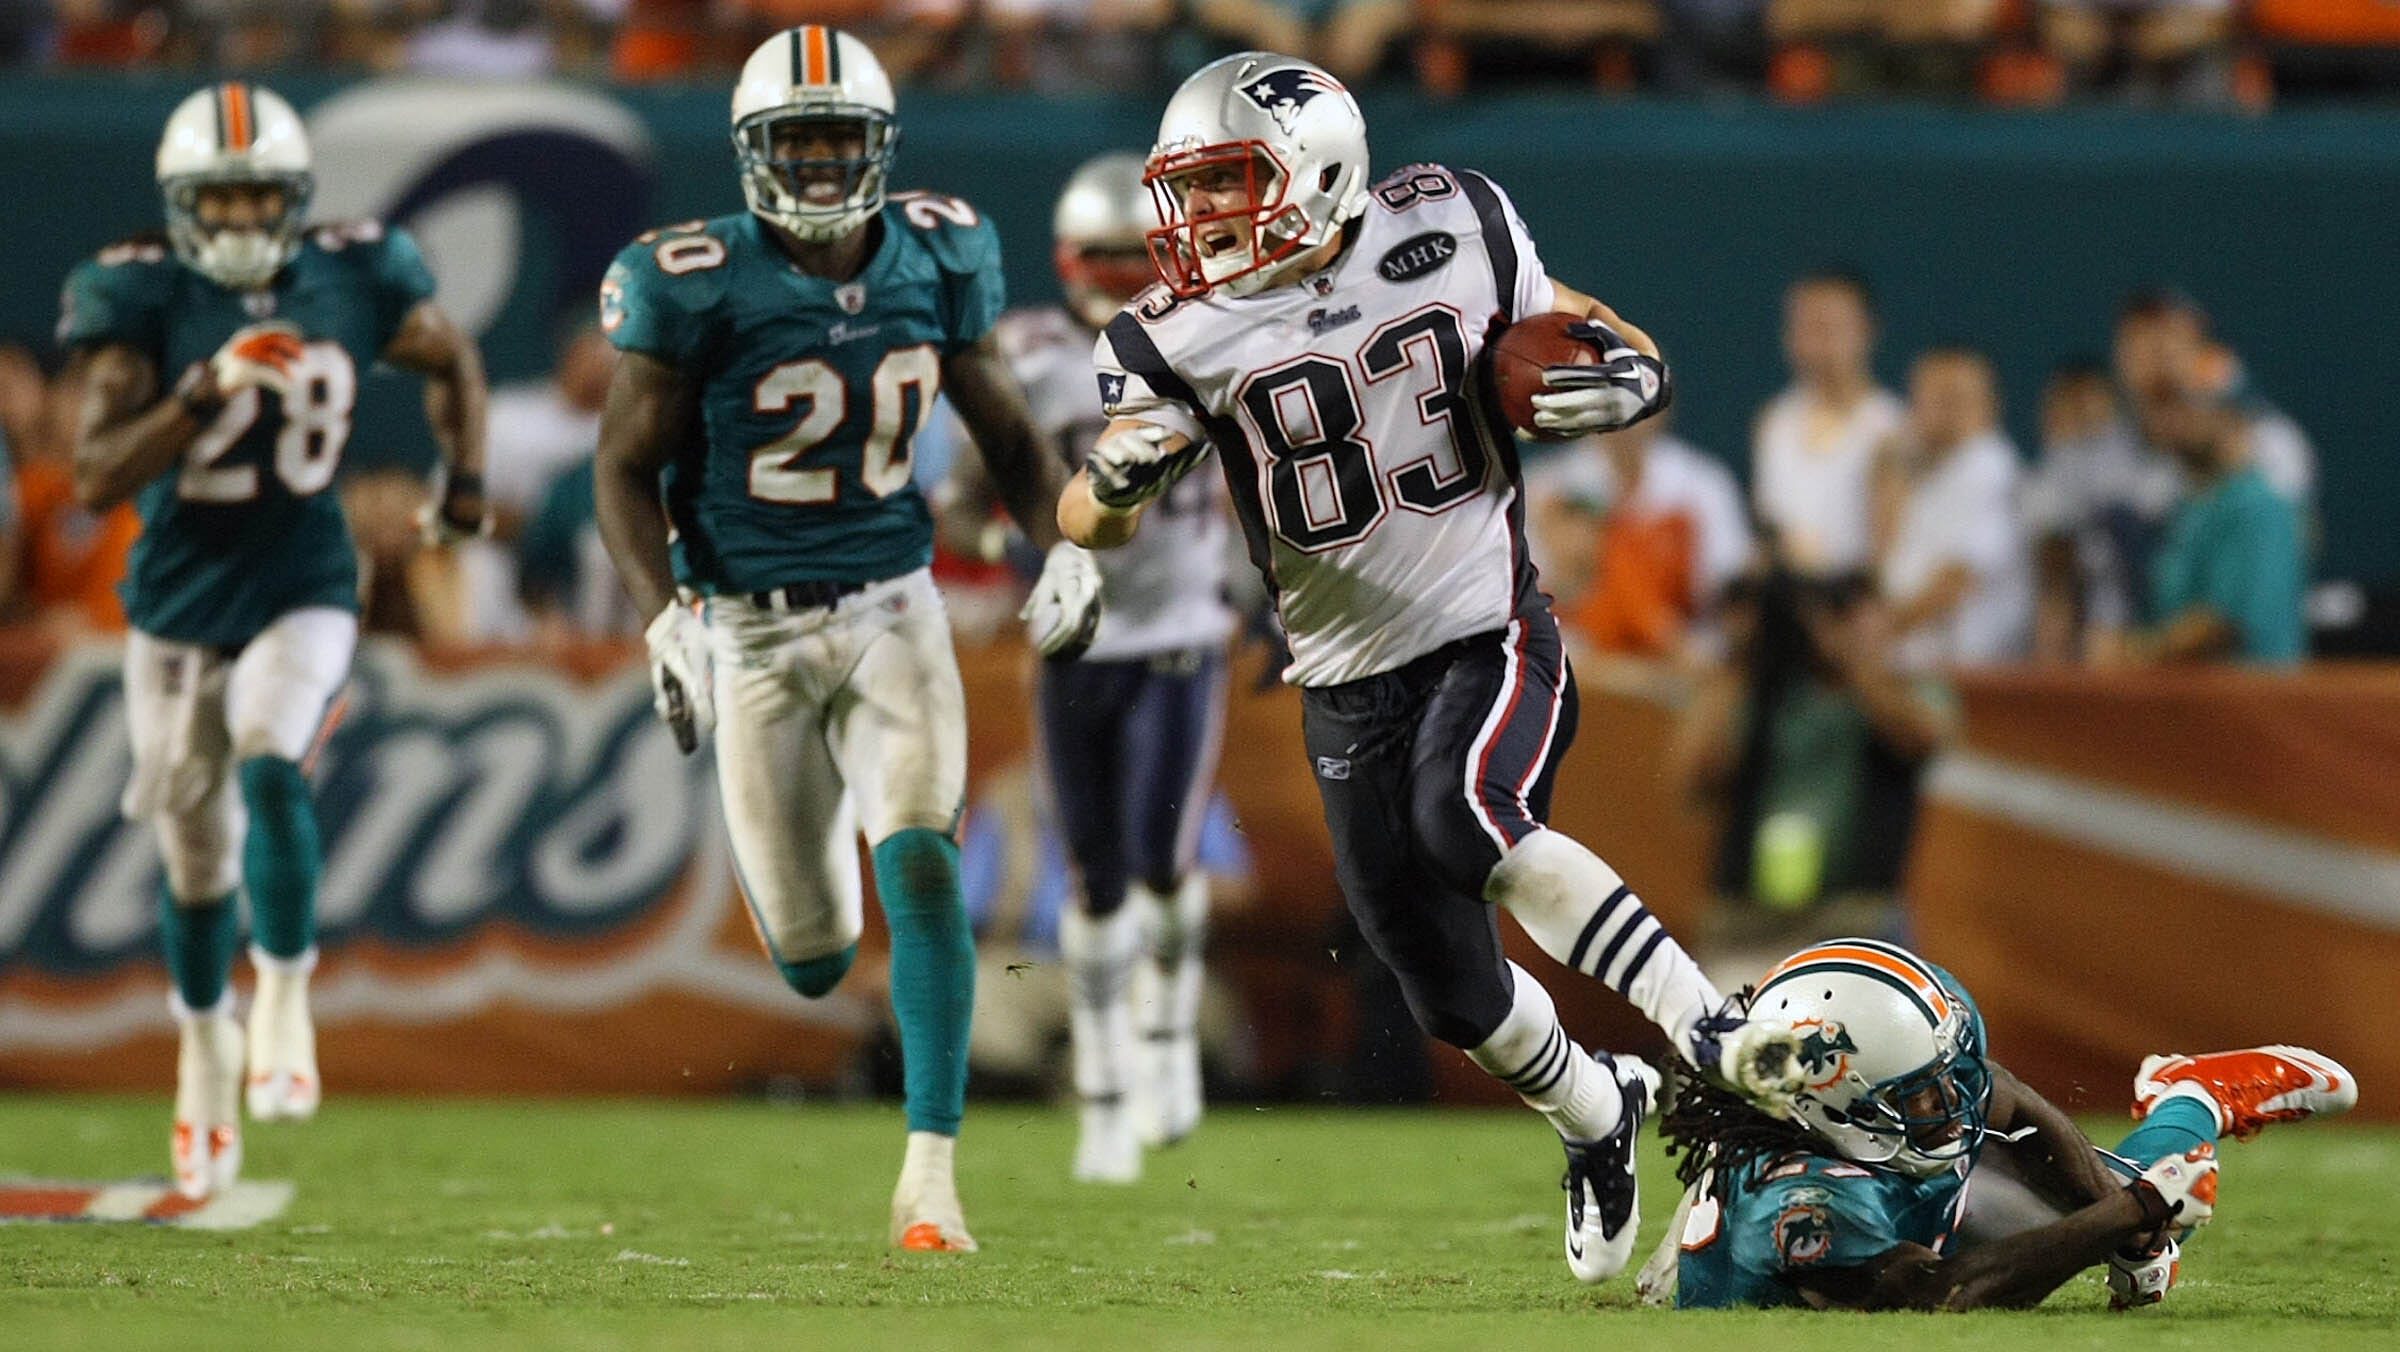 Wes Welker breaks a tackle from a Miami Dolphins defender